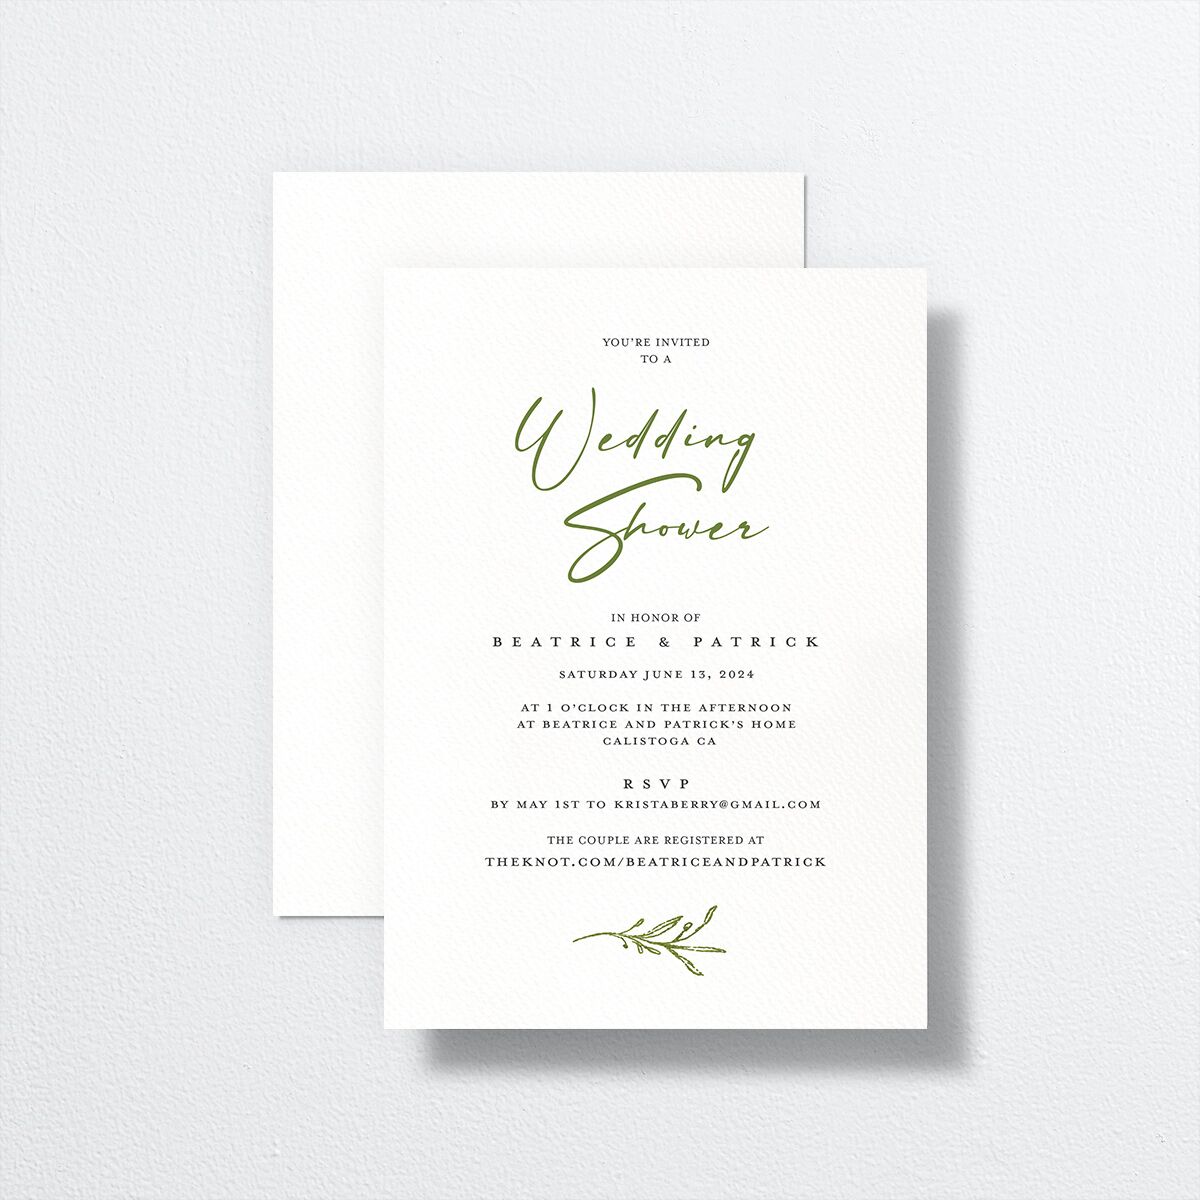 Romantic Setting Bridal Shower Invitations front-and-back in Green